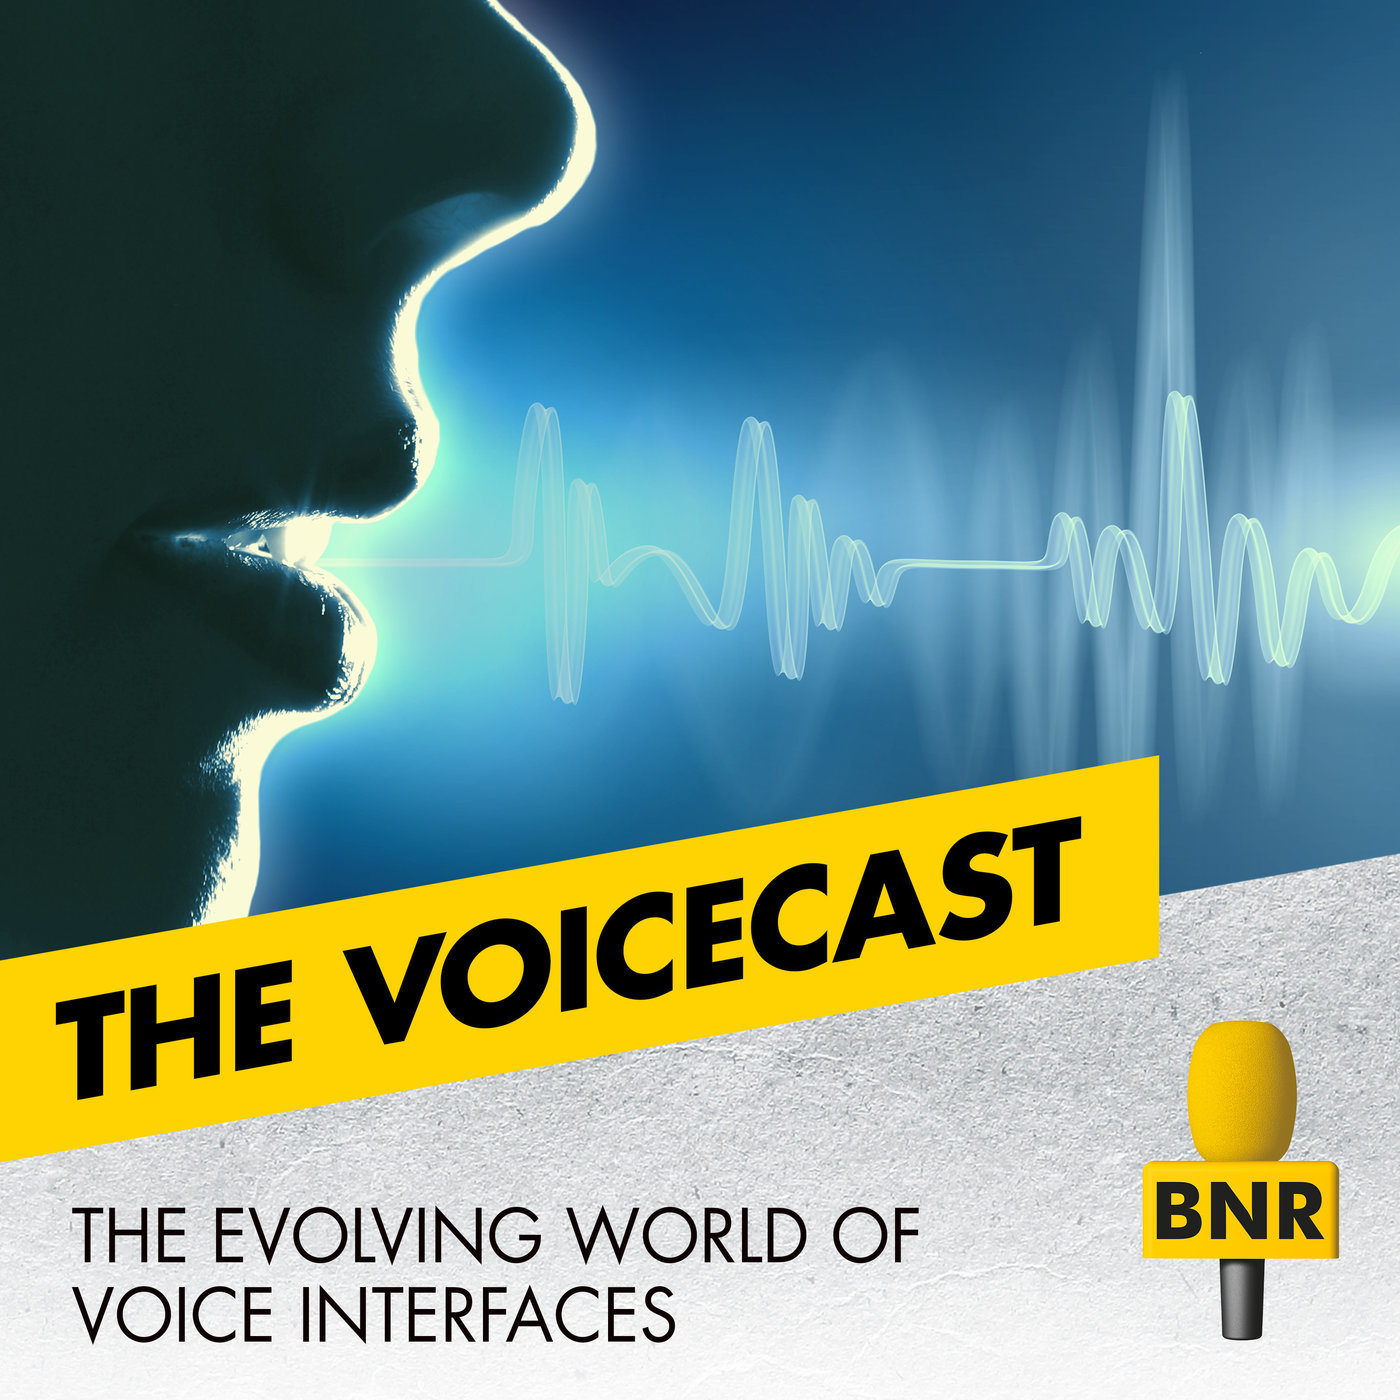 The Voicecast, a podcast on voice interfaces with your hosts Sam Warnaars and Maarten Lens-FitzGerald